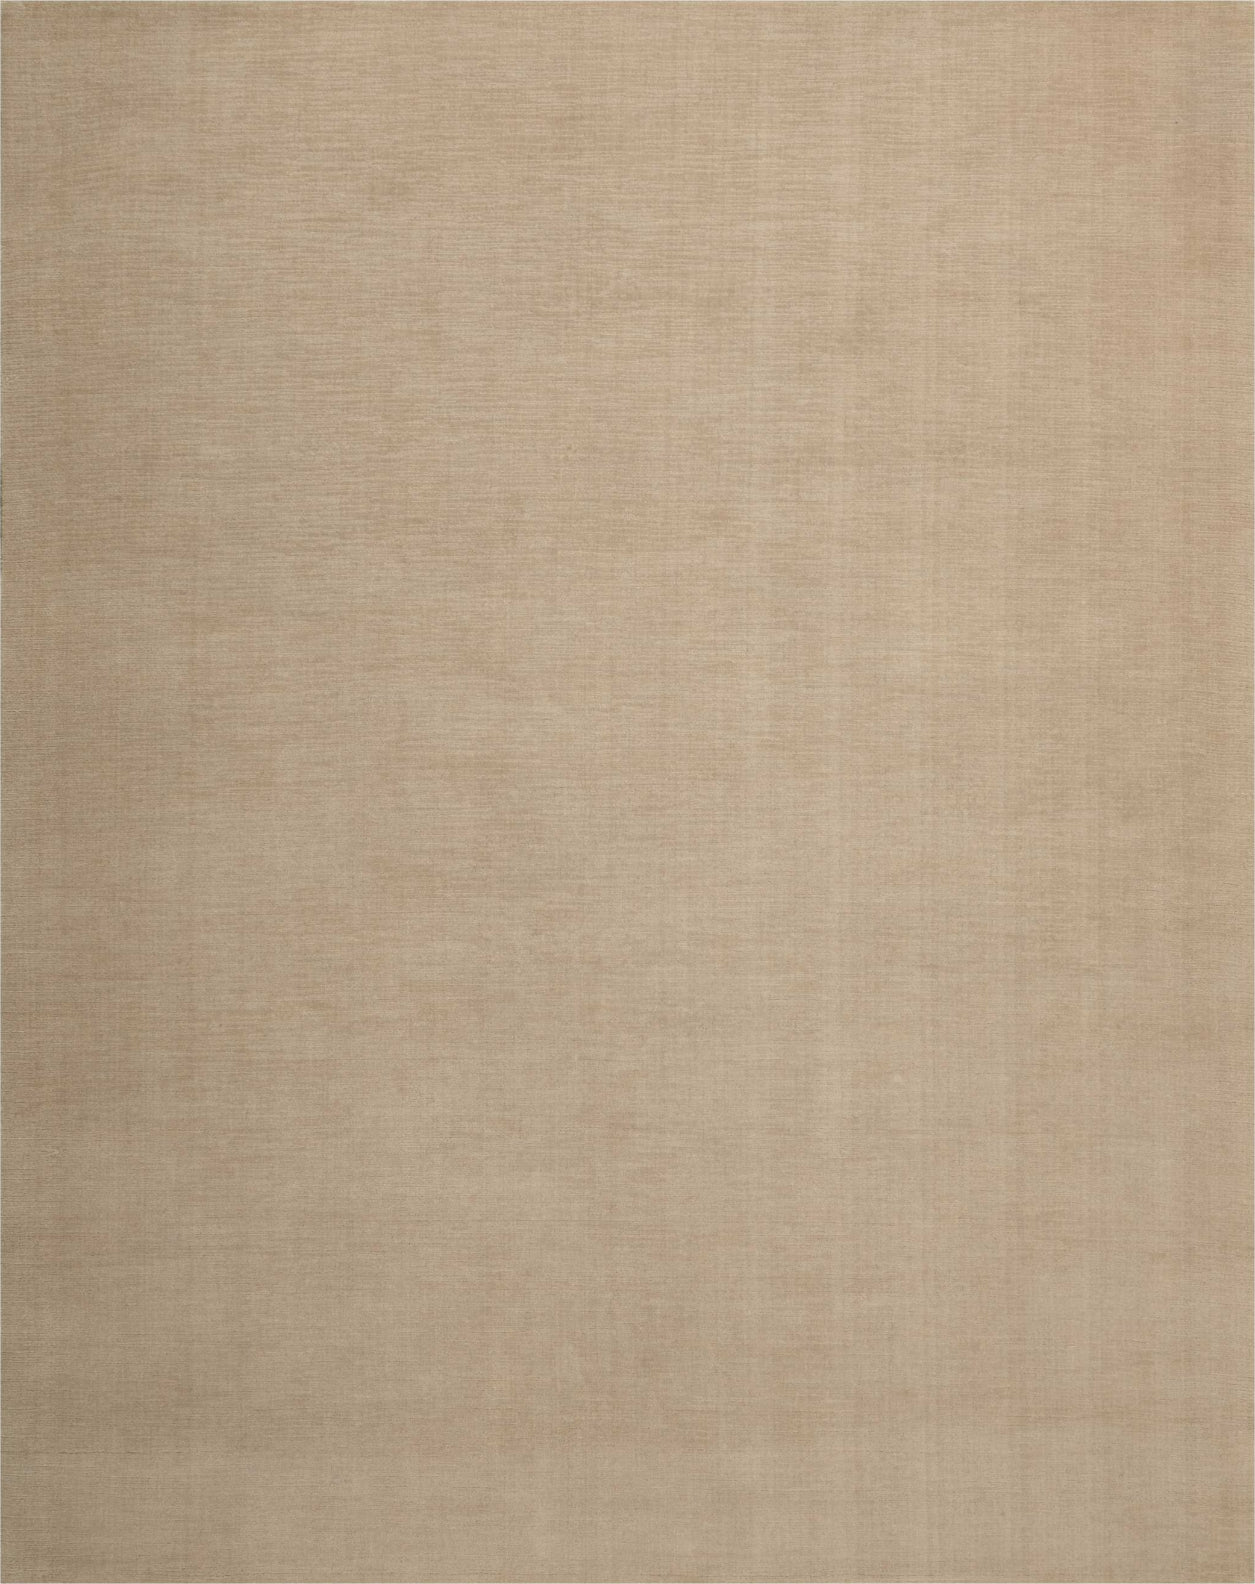 Christopher Guy Mohair Luxueaux CGM01 Sand Area Rug